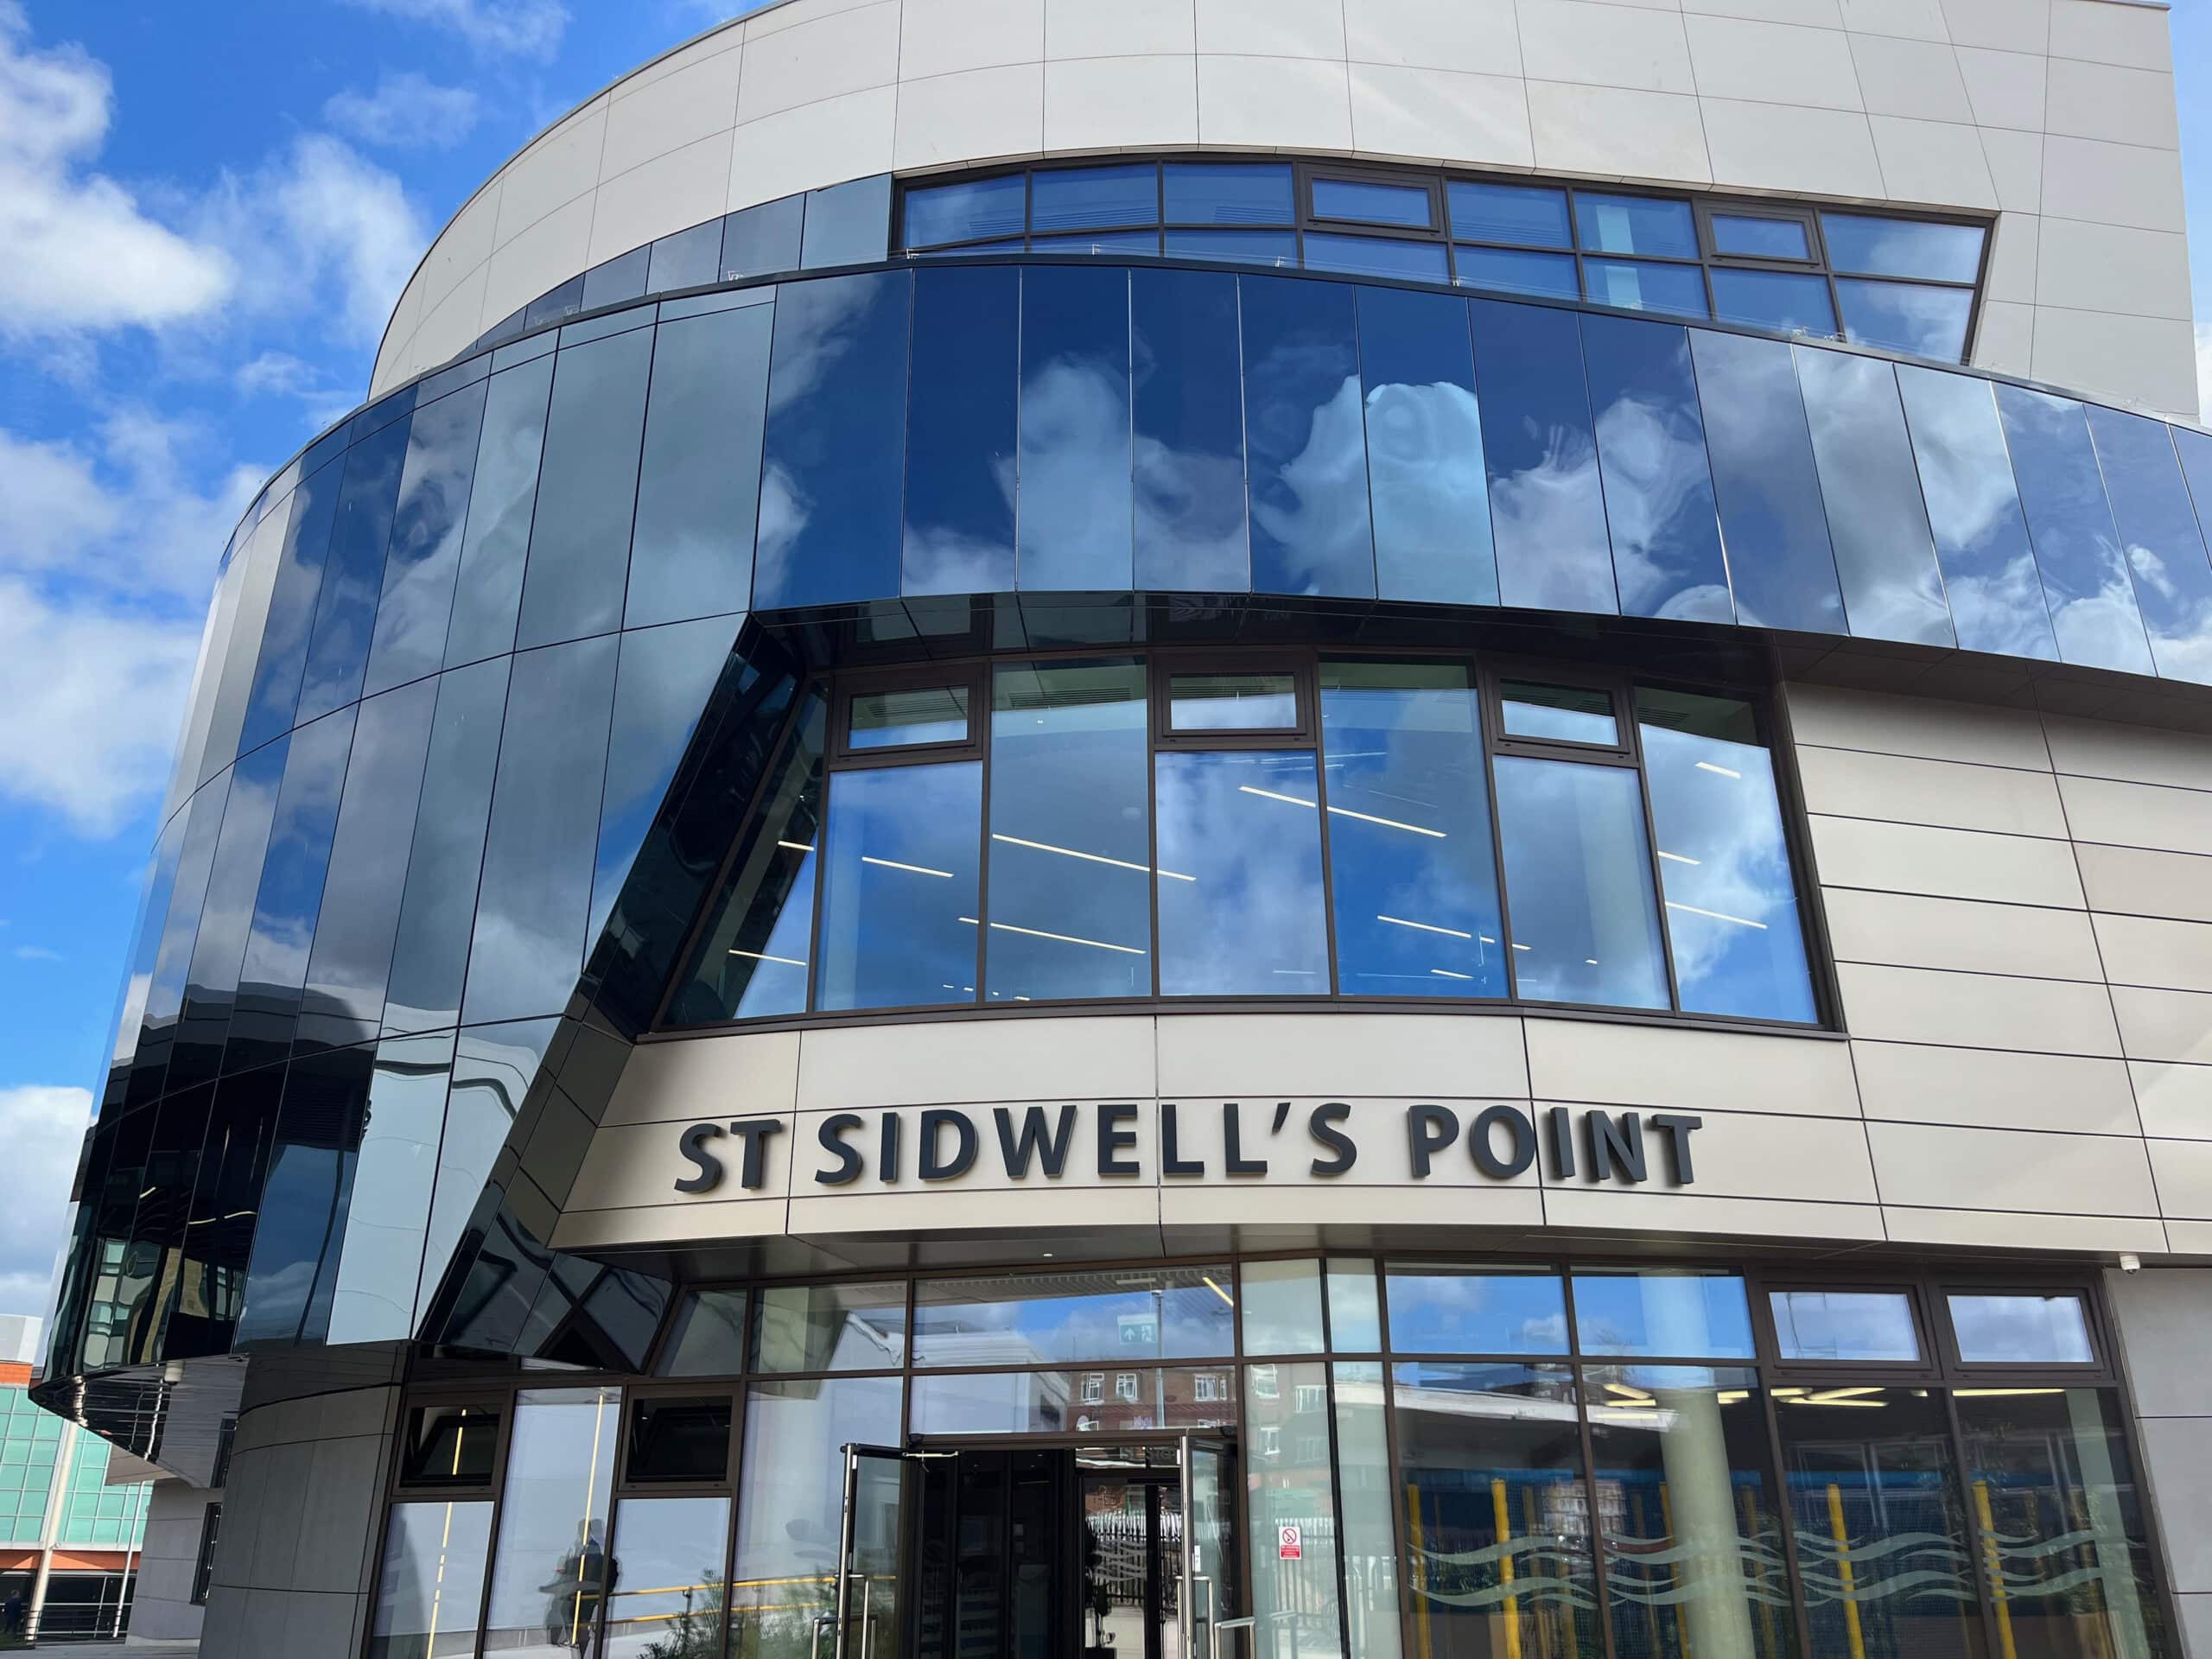 St Sidwell's Point, Royaume-Uni